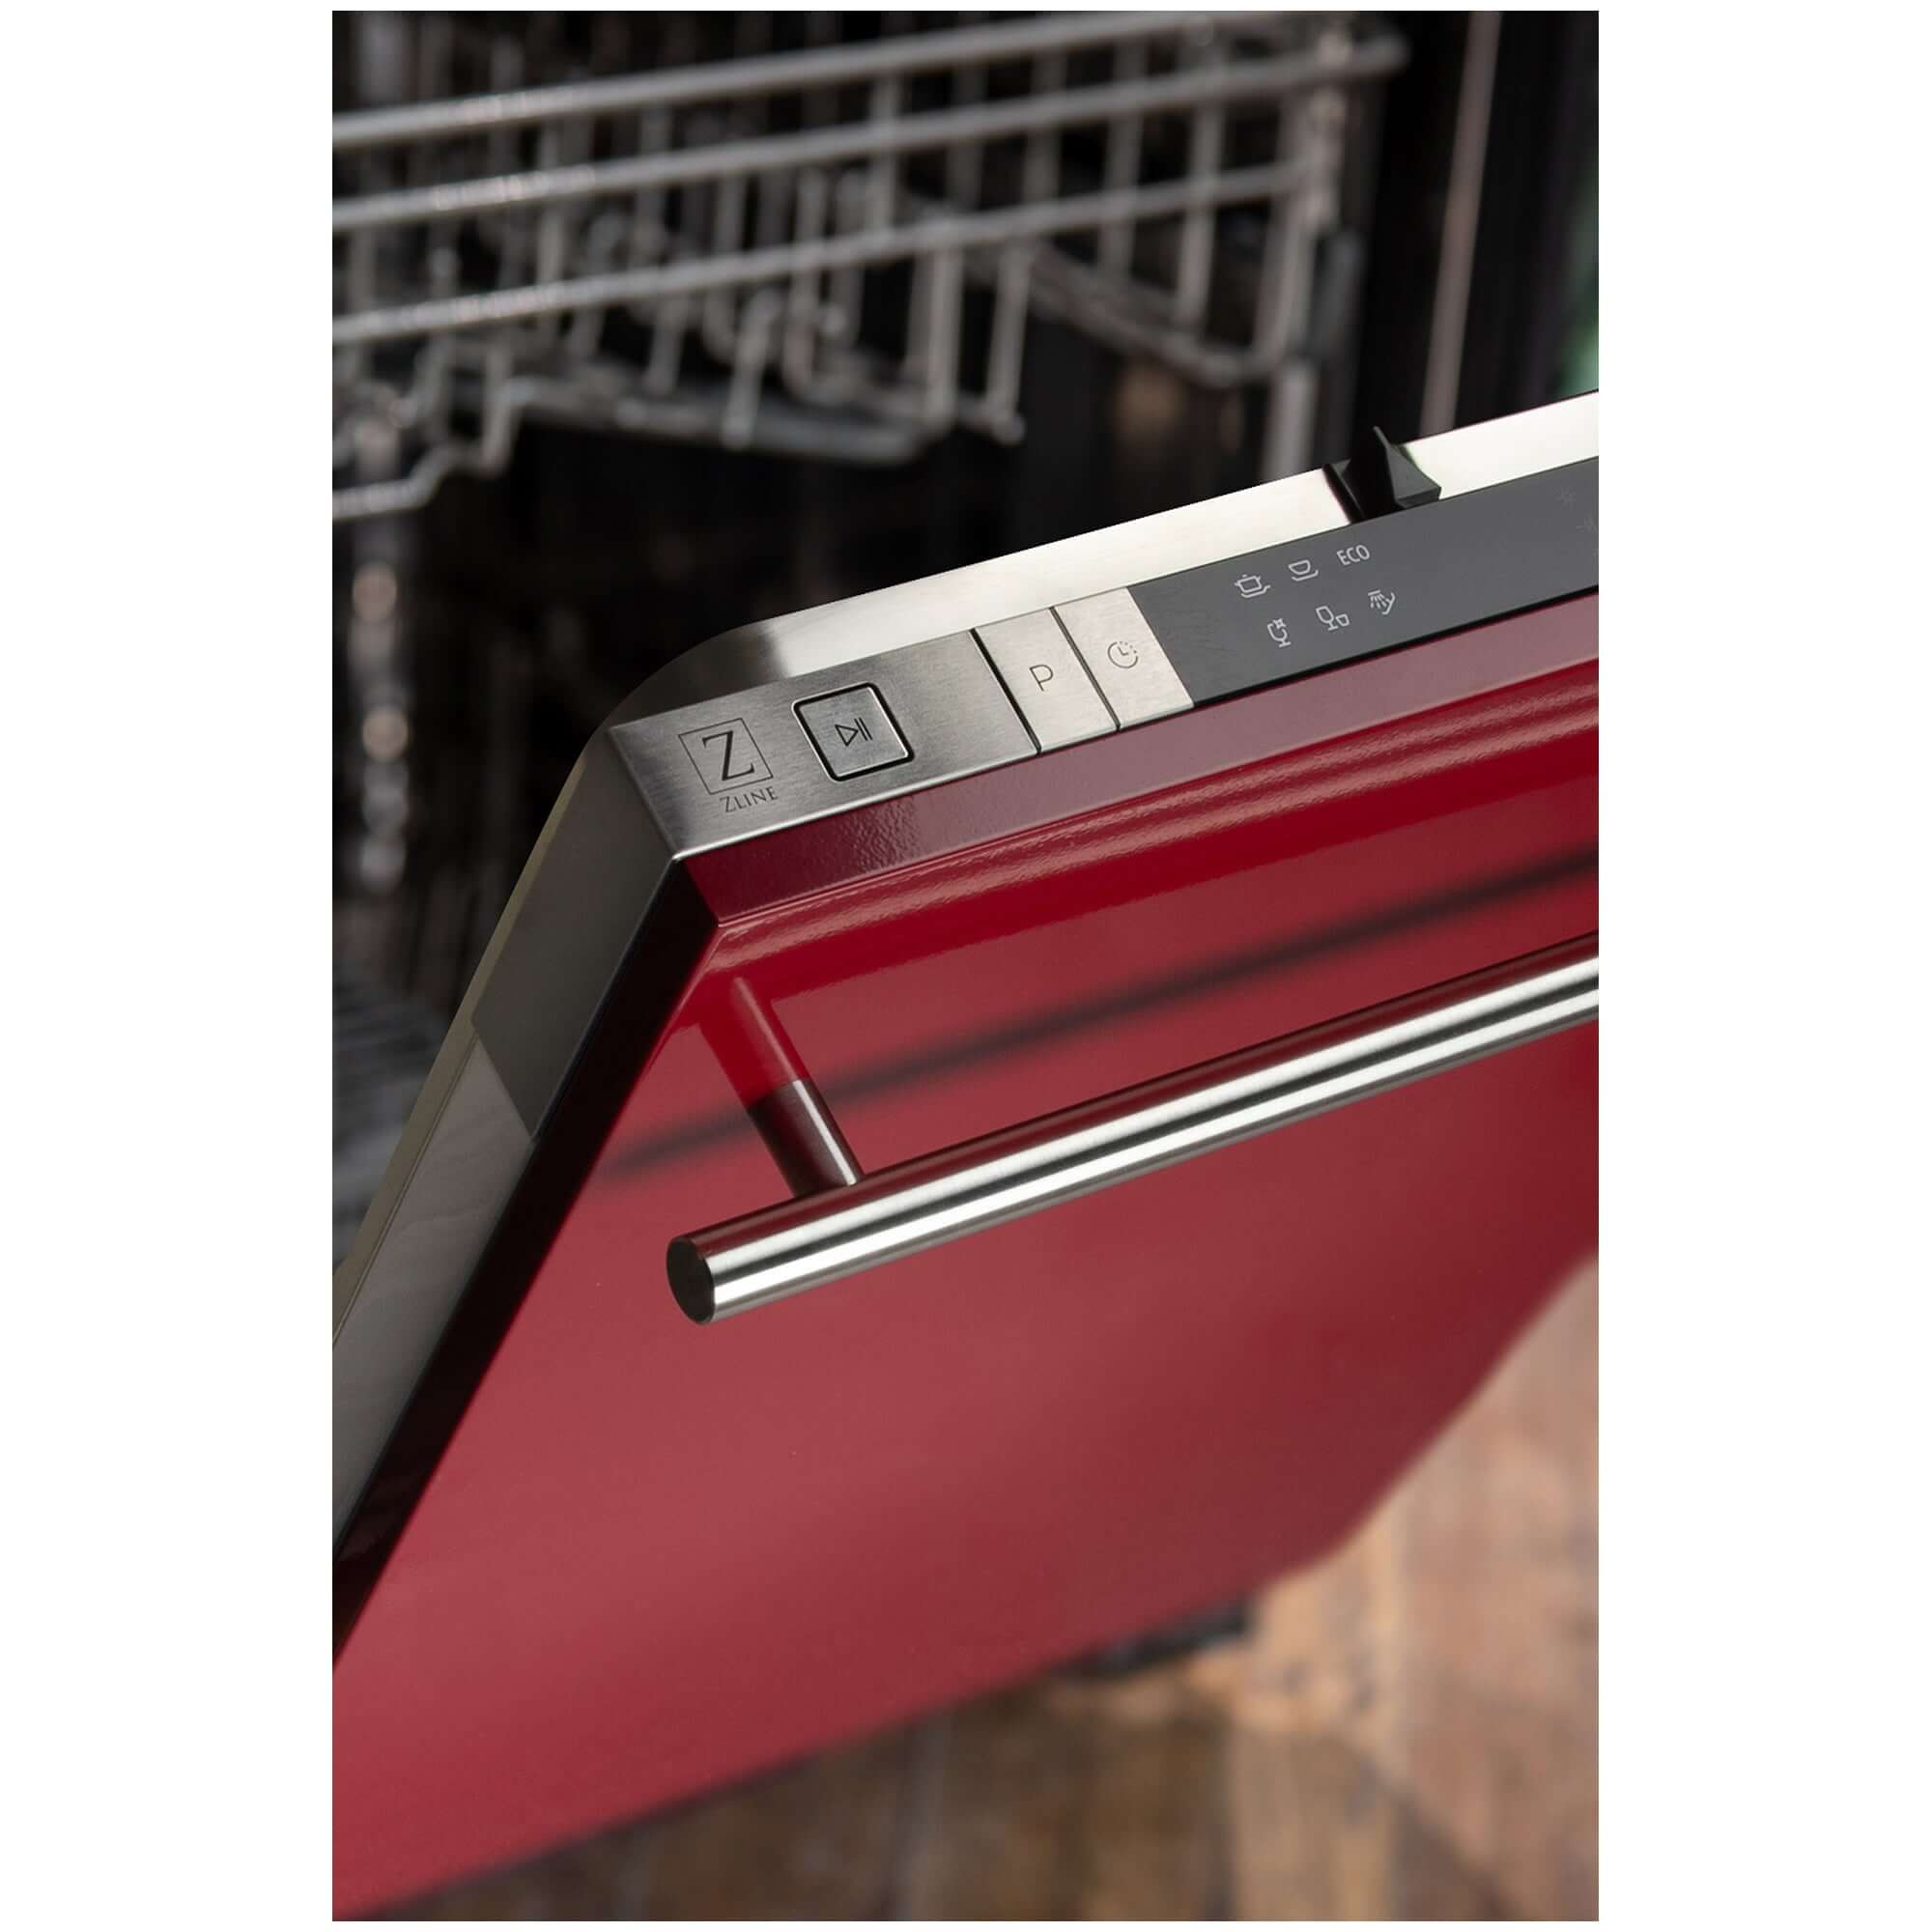 ZLINE 18 in. Compact Top Control Dishwasher with Red Gloss Panel and Modern Style Handle, 52 dBa (DW-RG-H-18)